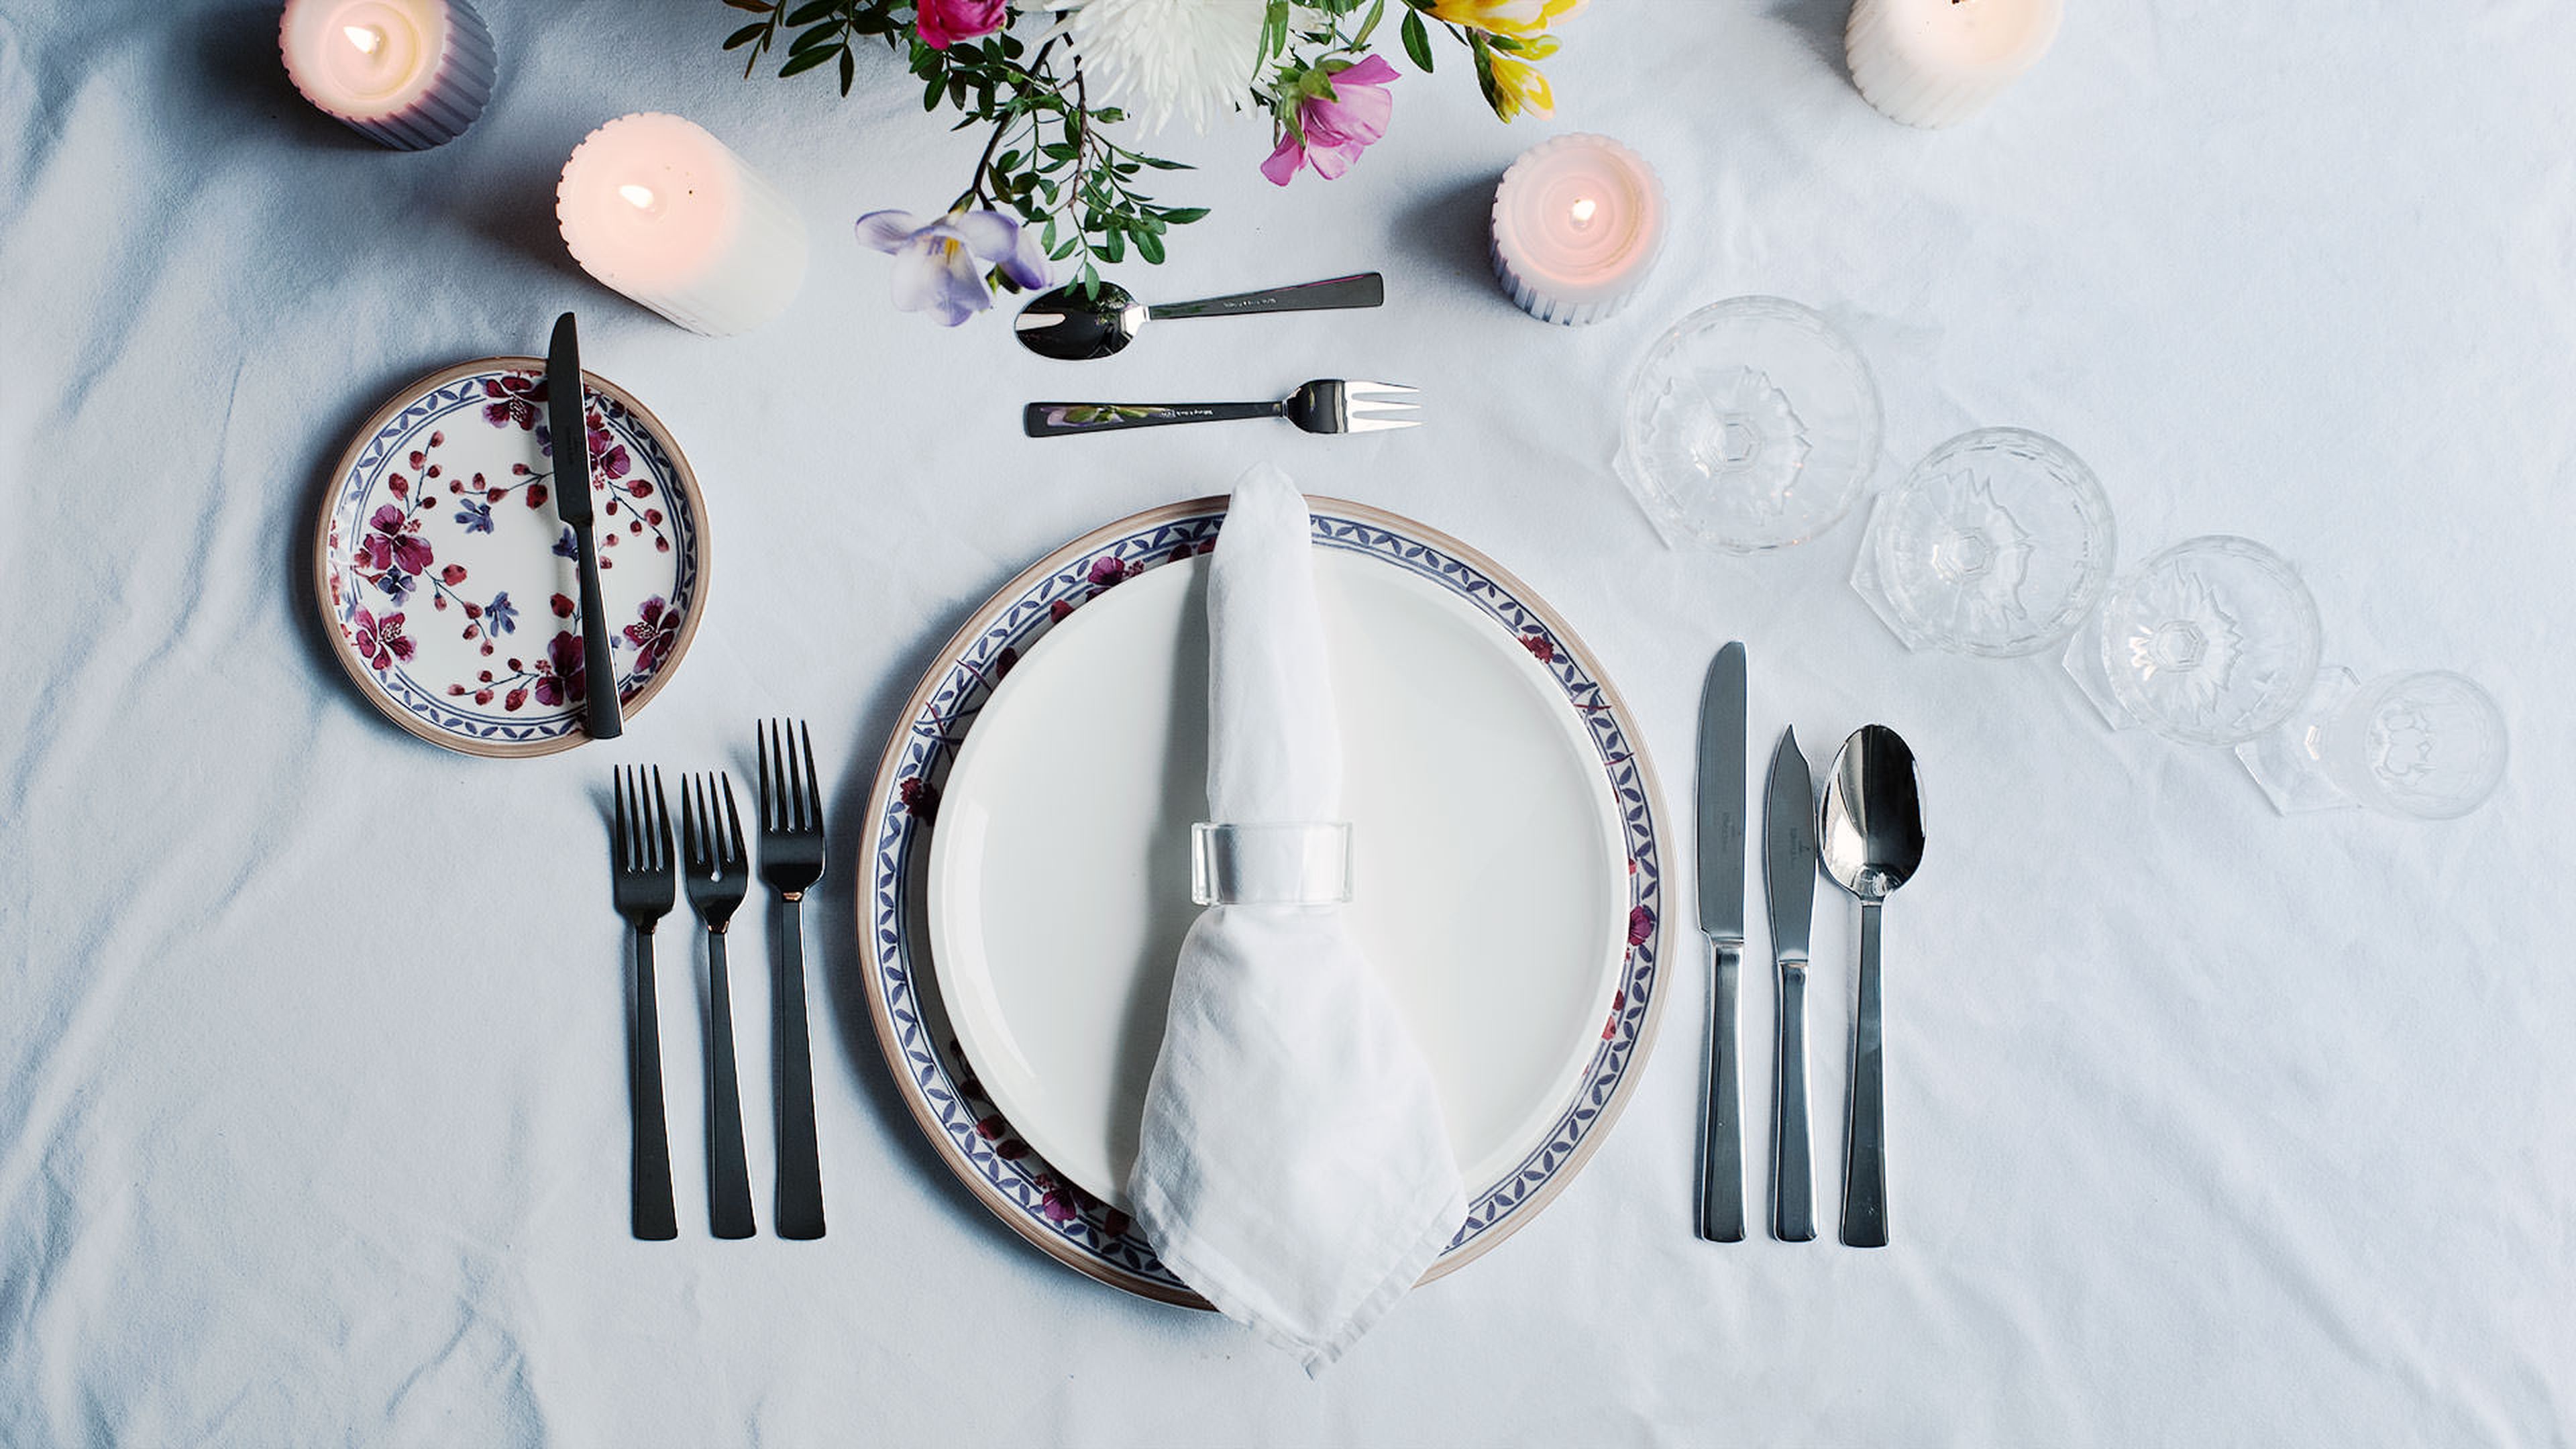 How to Set a Formal Table - Stemware